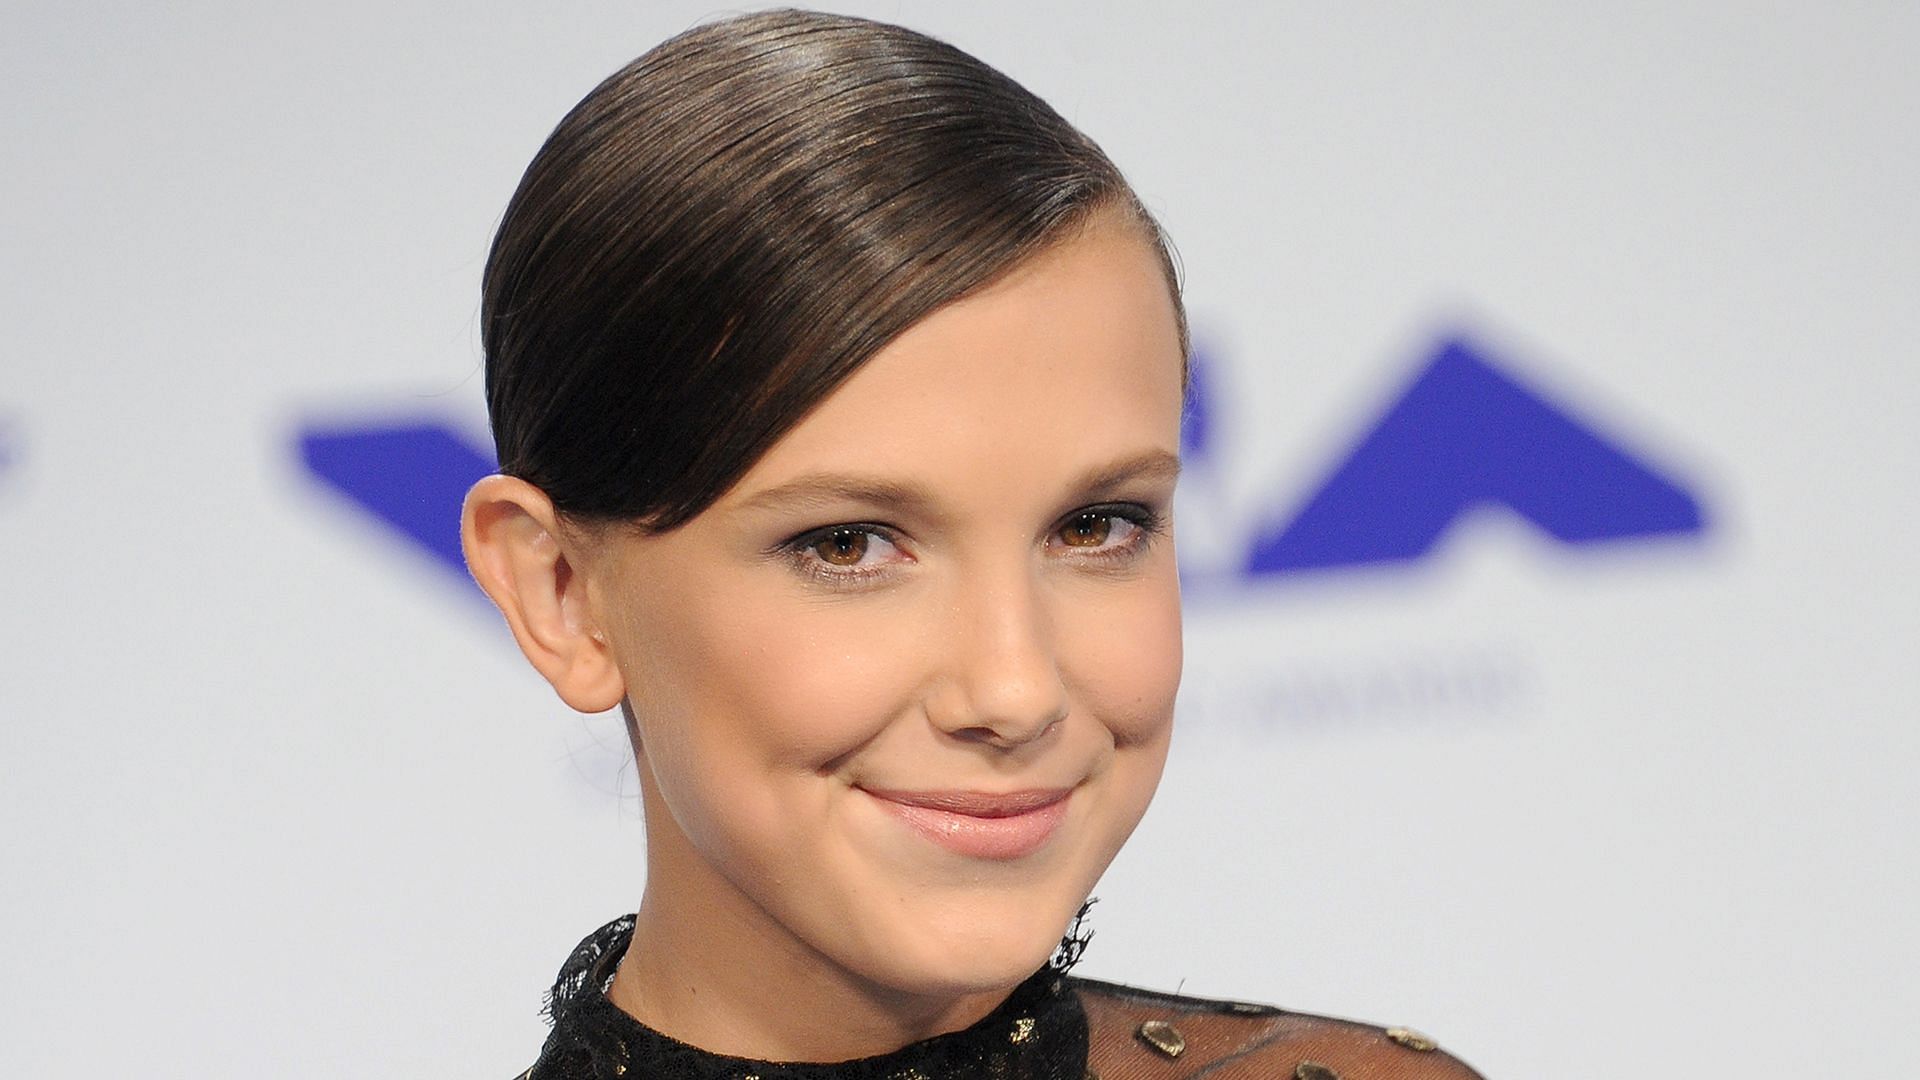 Millie Bobby Brown at 2017 MTV Video Music Awards (Image via Getty)